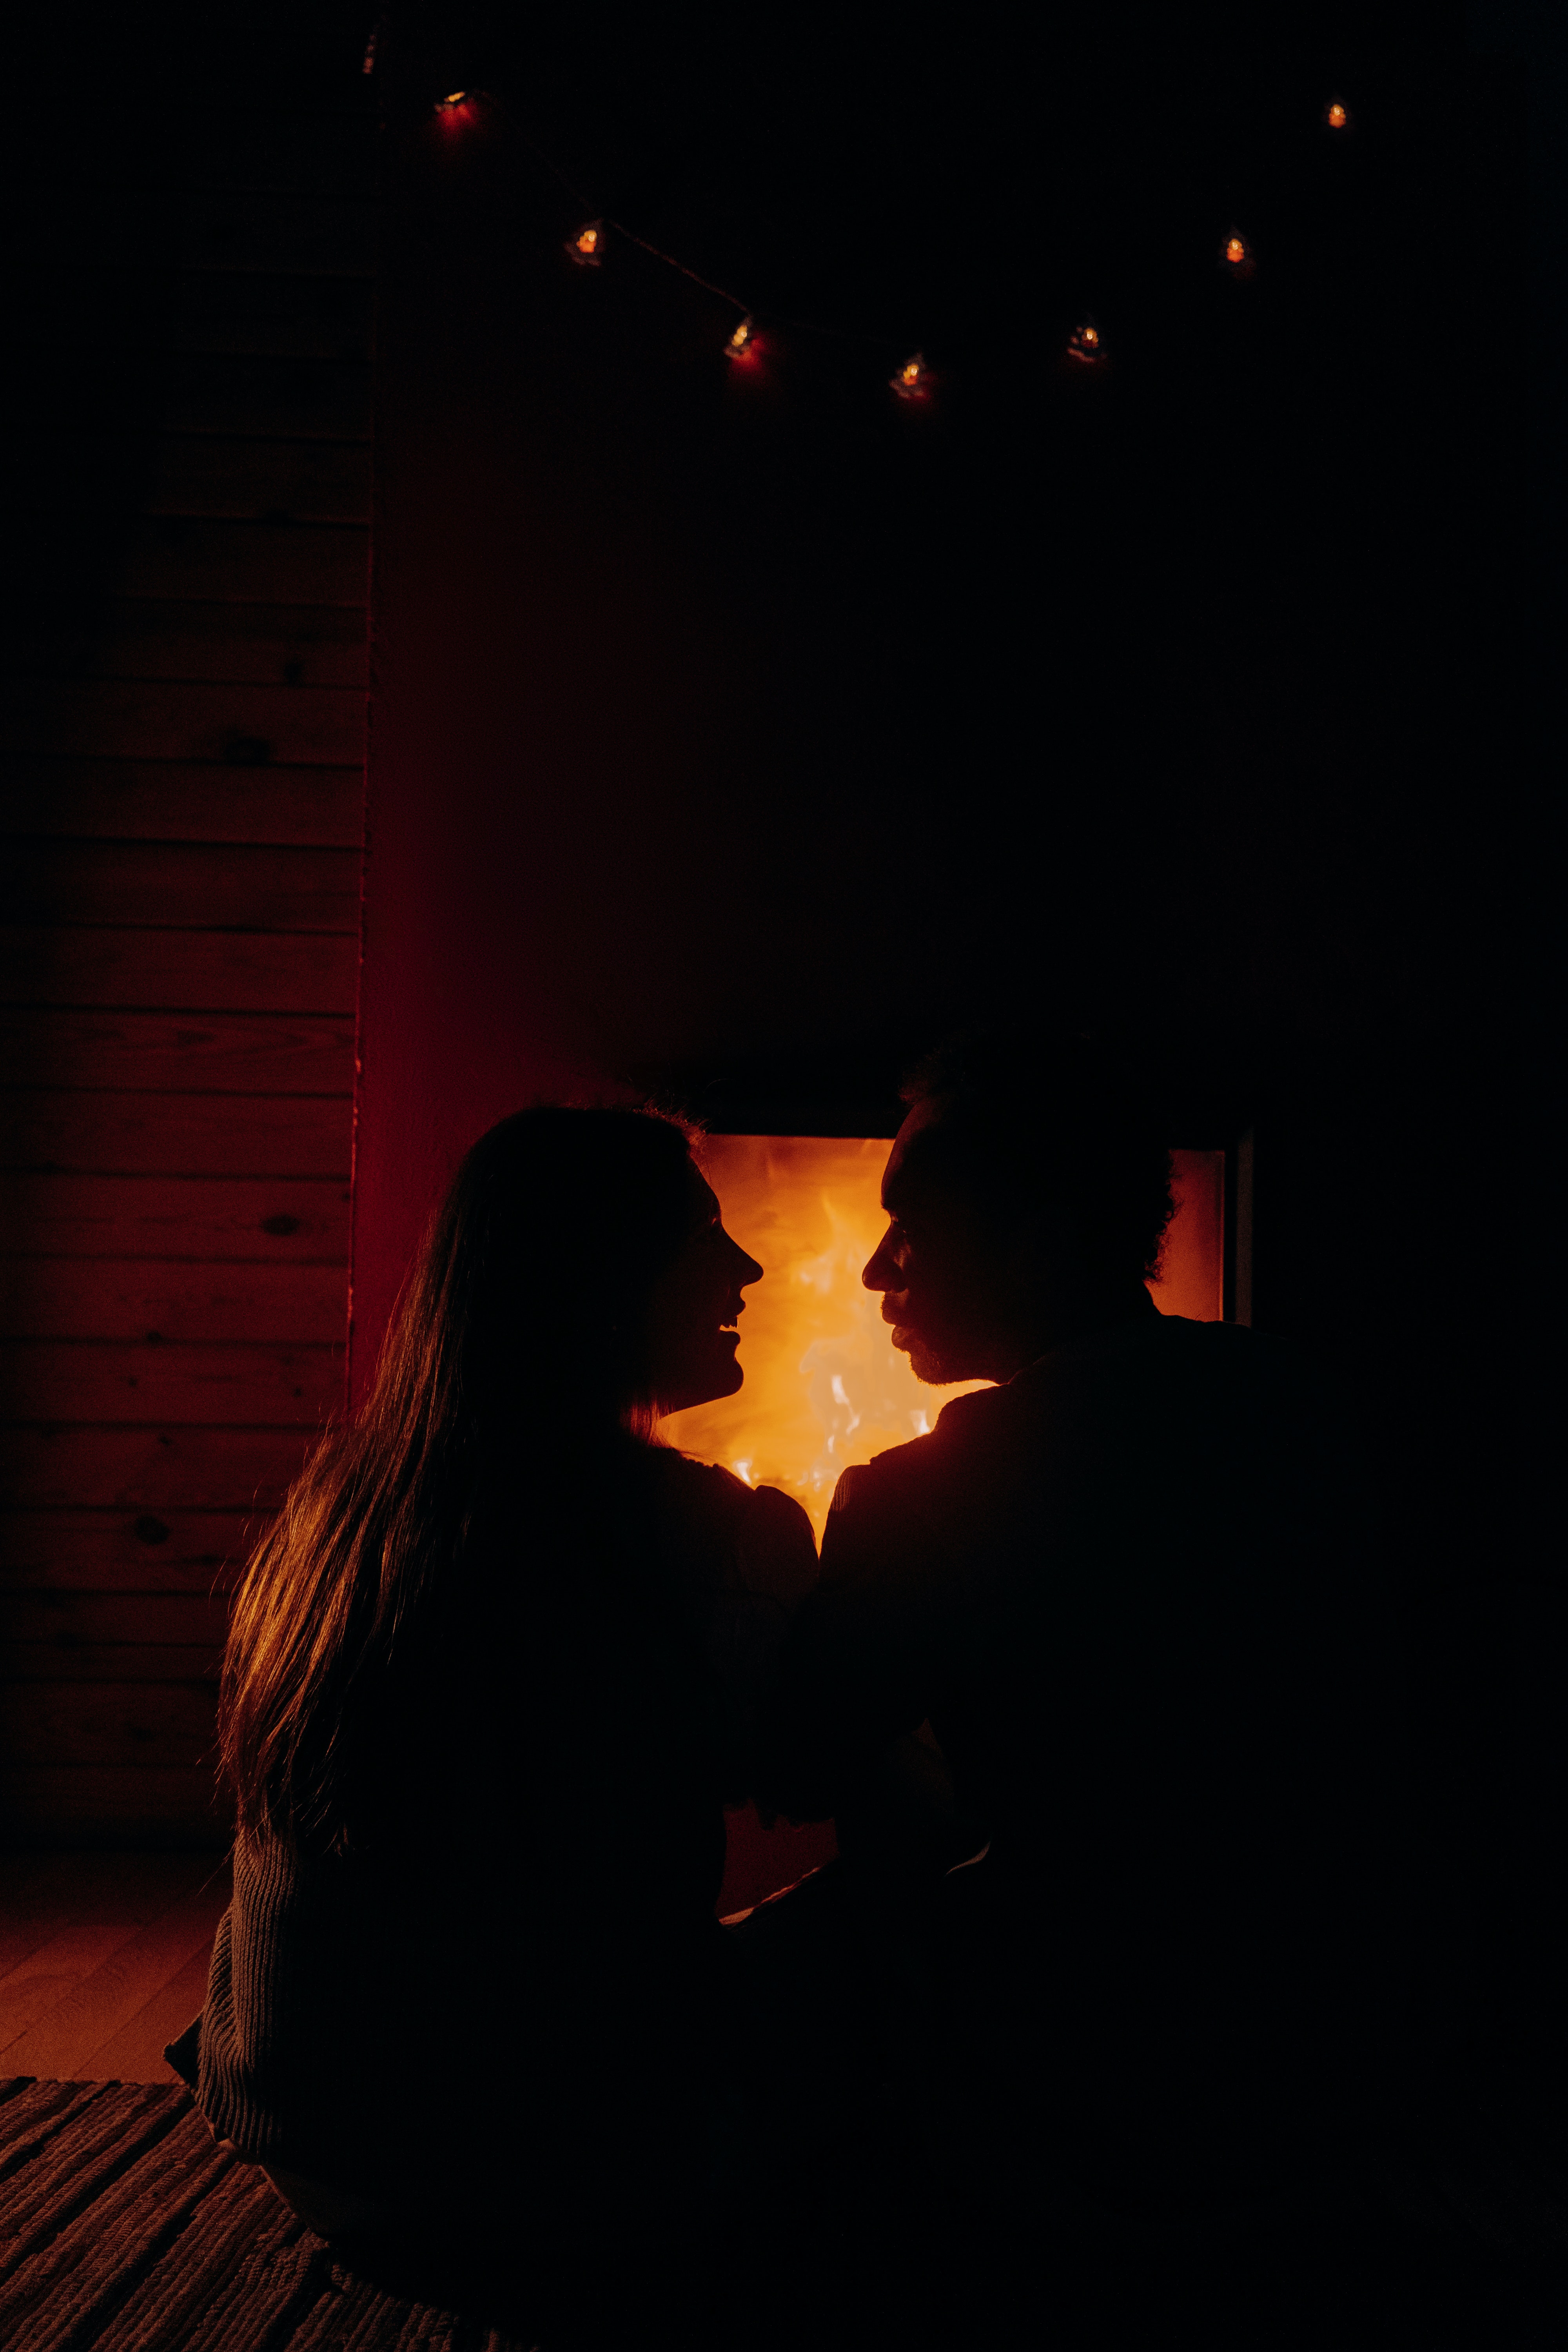 Two people sitting in front of a fire. | Source: Pexels